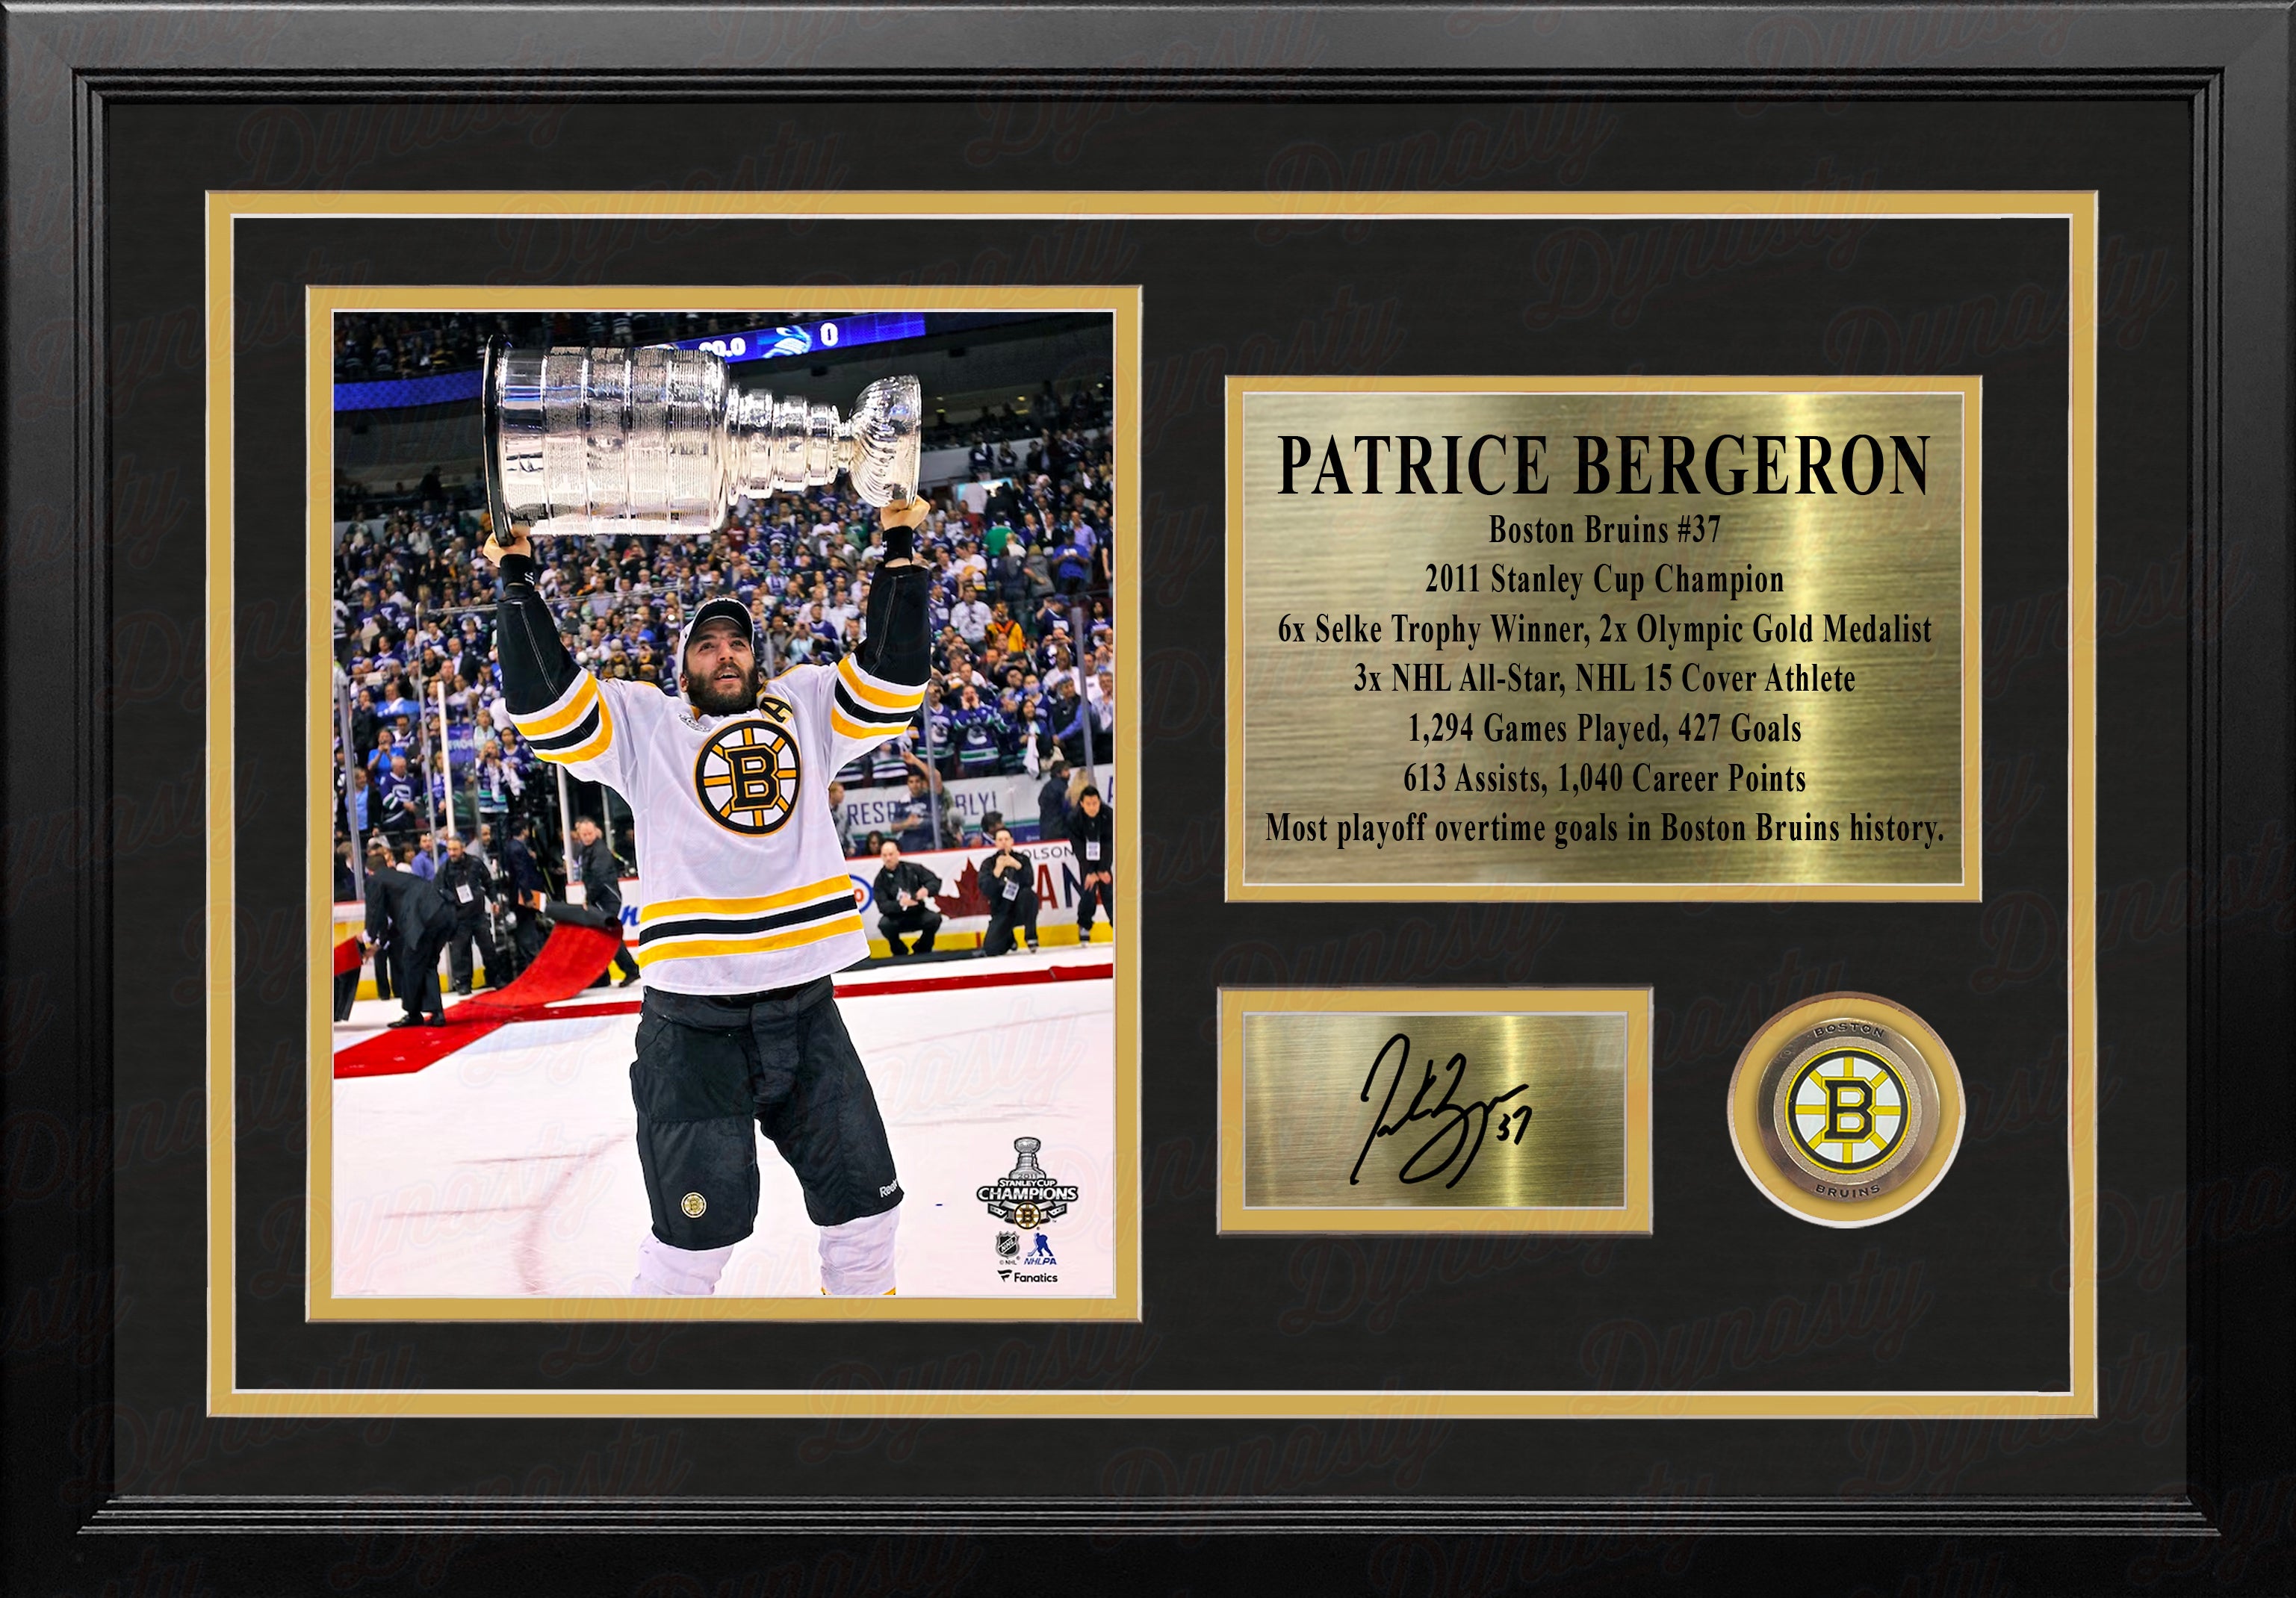 Patrice Bergeron Signed / Autographed Inscribed Captain Photo 8x10